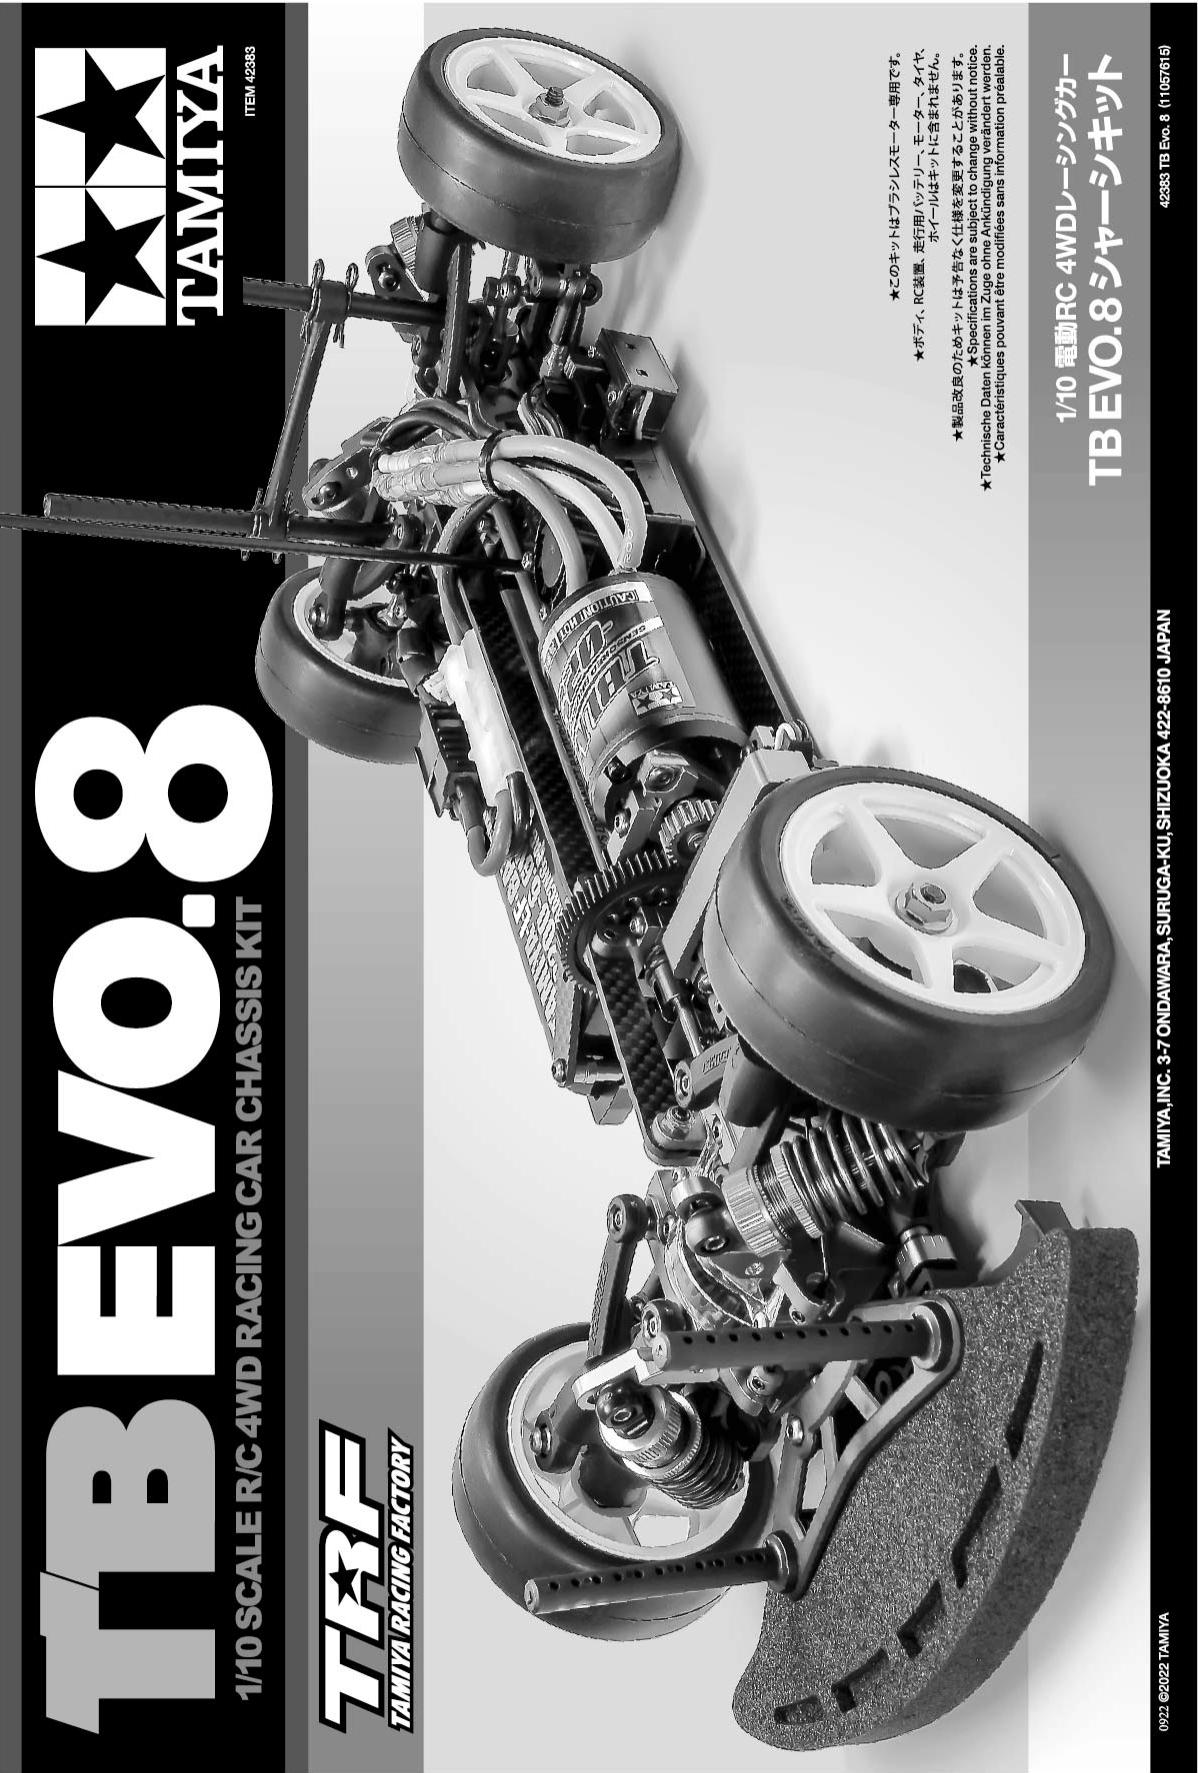 Assembly manuals of the Tamiya 42383 Chassis Kit TB Evo.8 & 47489